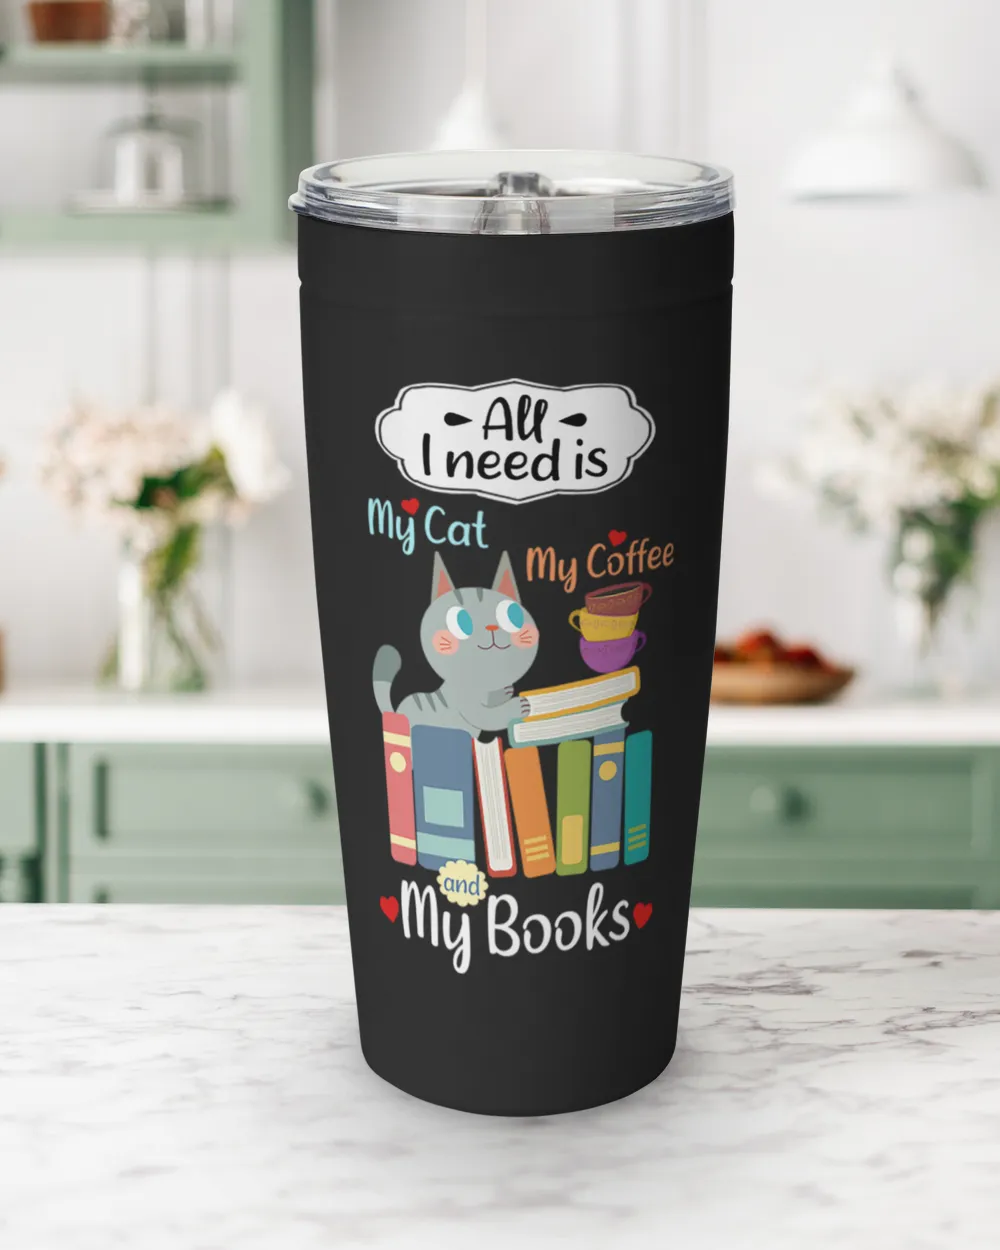 Cats And Books ALL I NEED IS MY CAT MY COFFEE AND MY BOOKS - Cat Lovers, Book Lovers - Dark Colors  Porcupine Tees